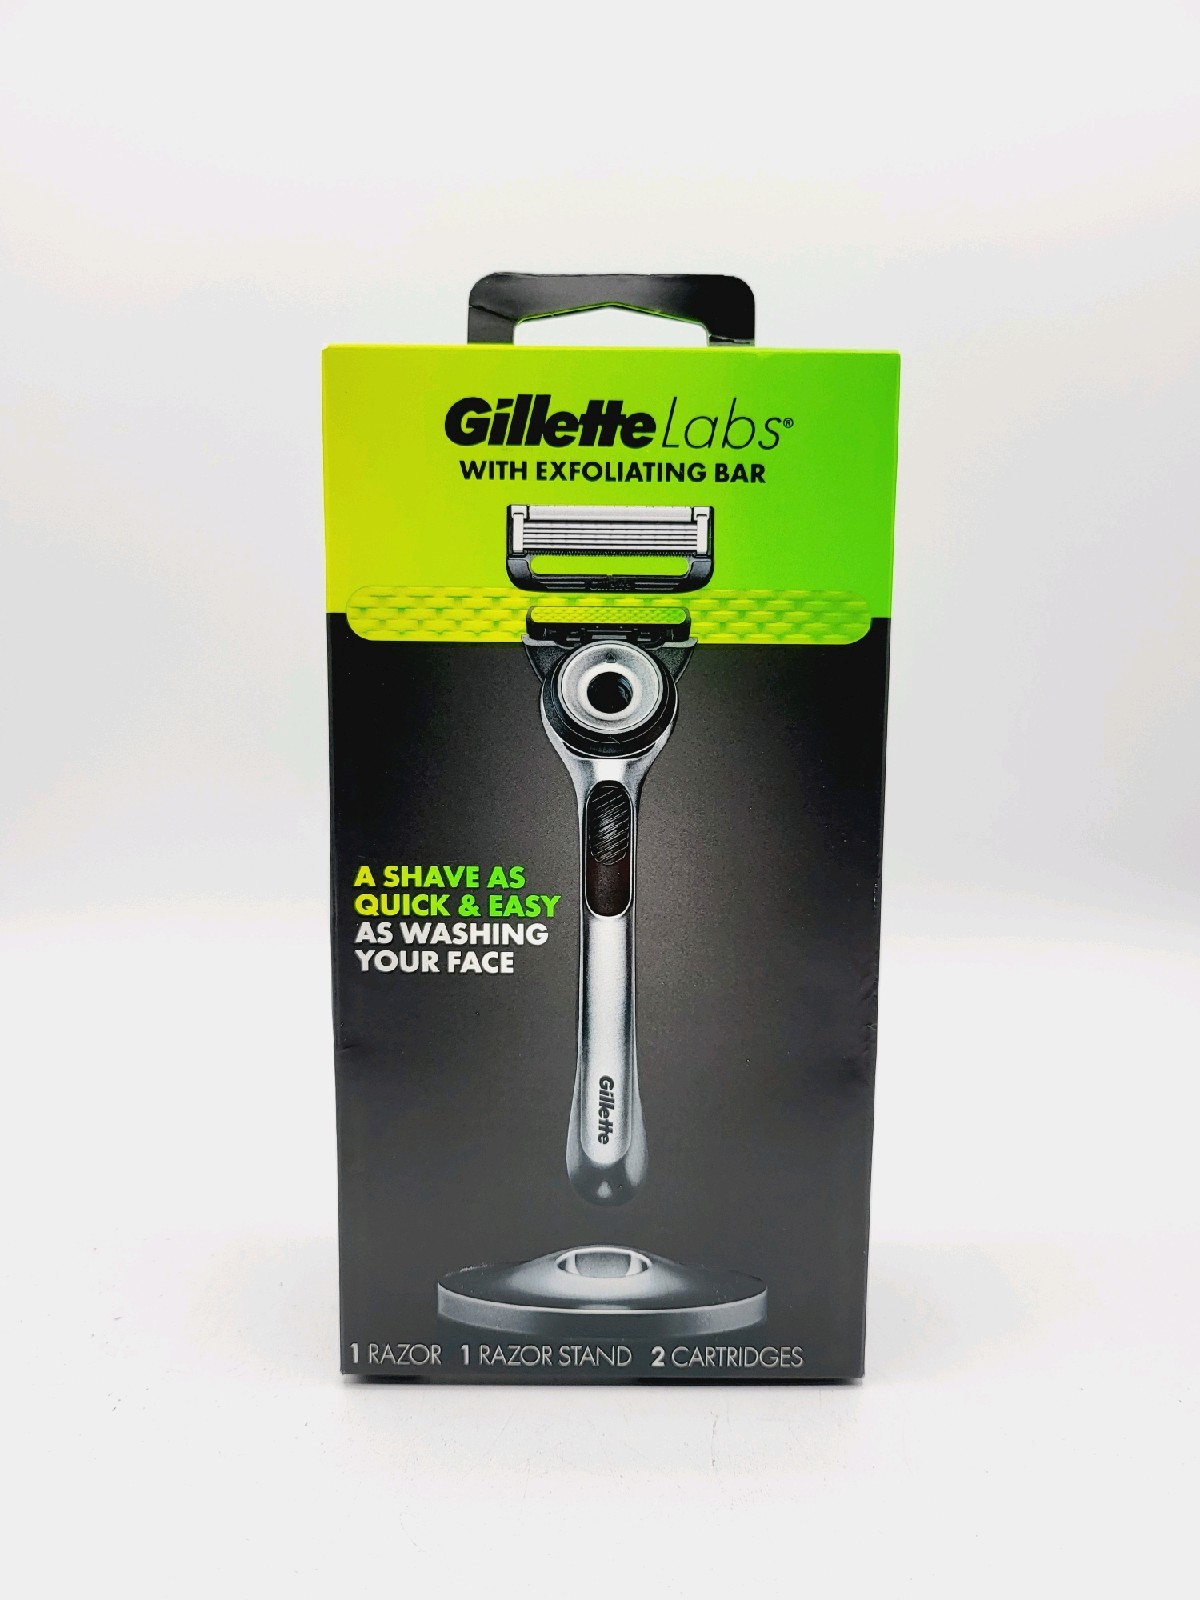 Gillette Labs Razor With Exfoliating Bar